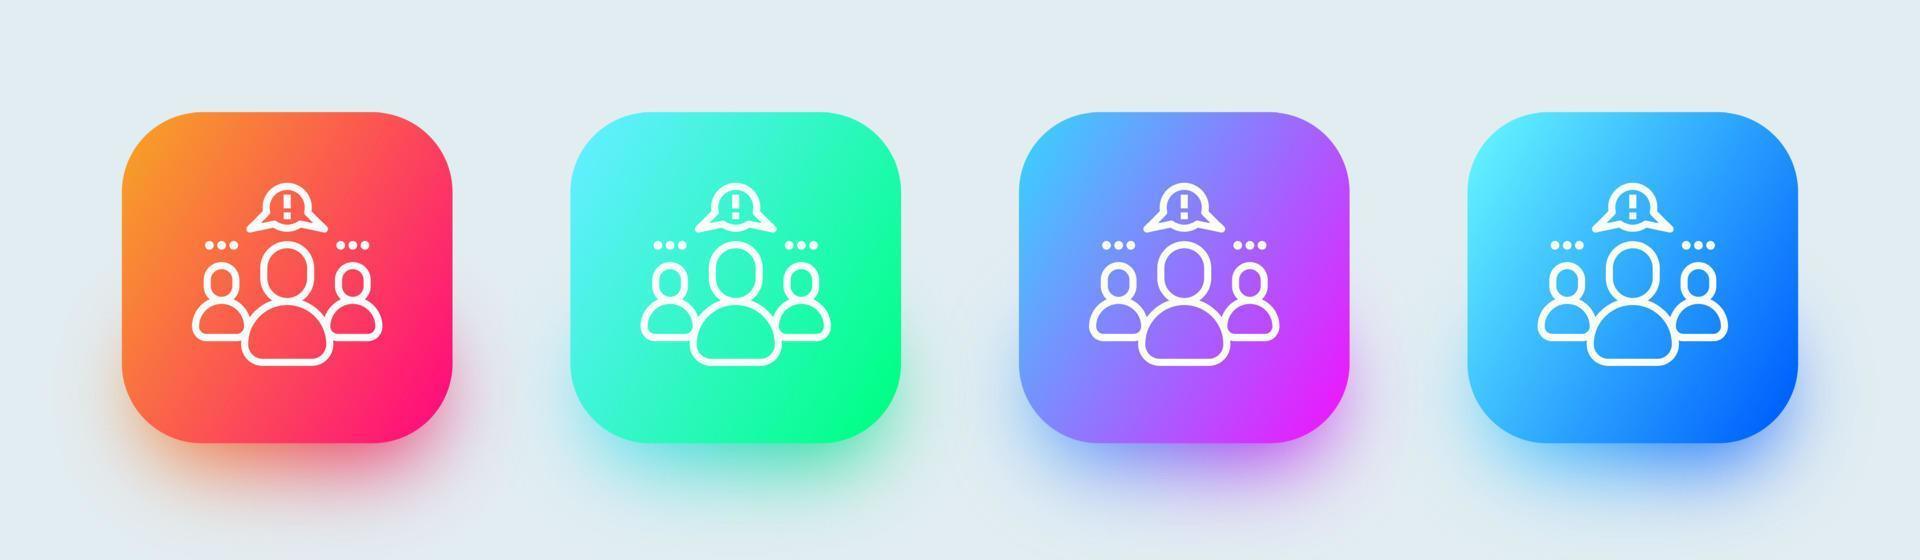 Team line icon in square gradient colors. Partnership signs vector illustration.